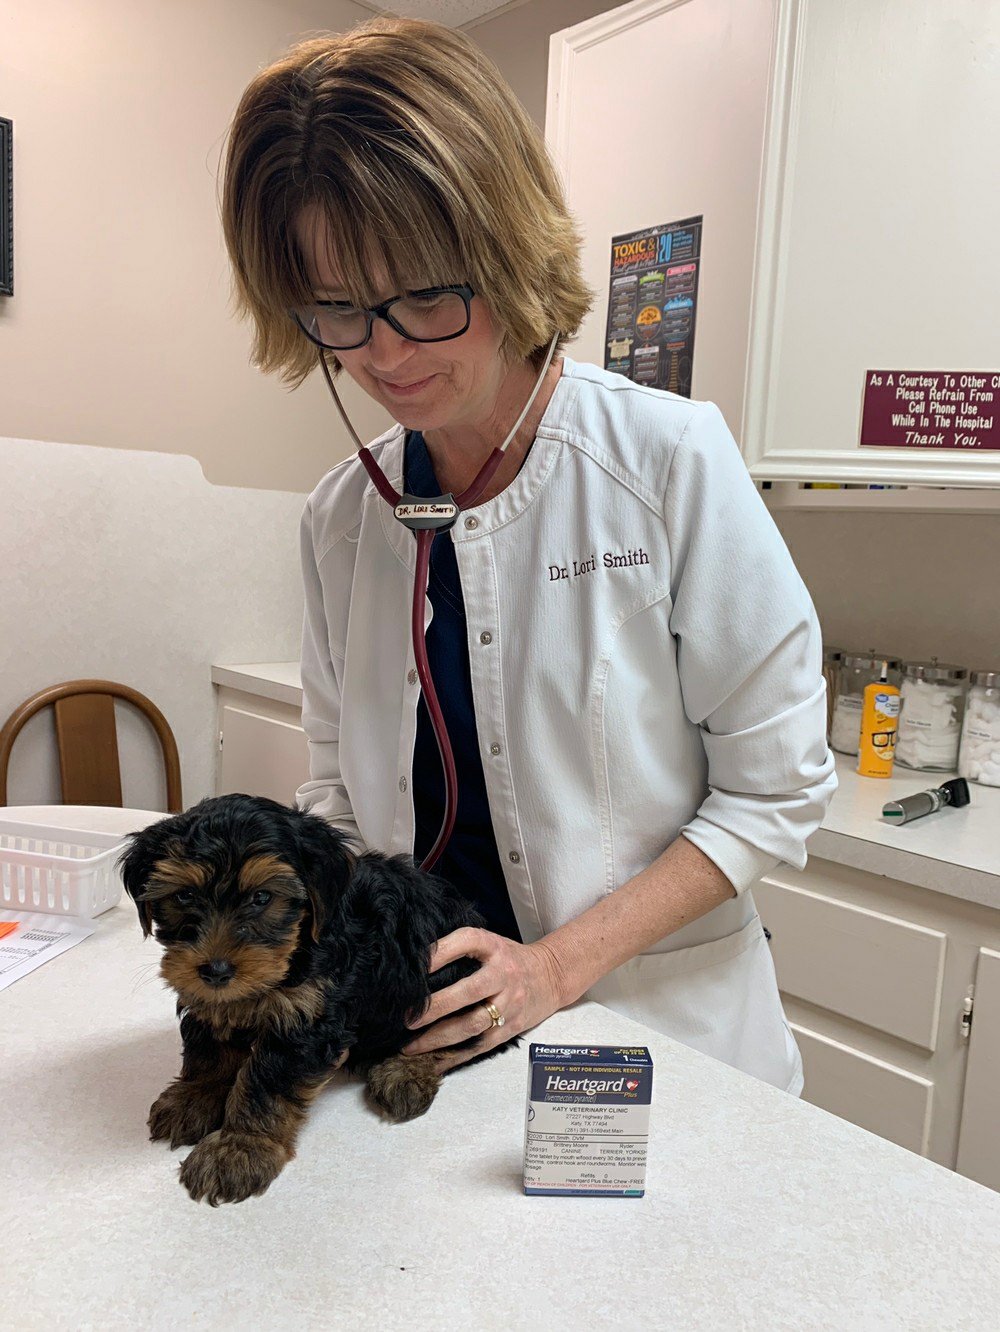 Regular checkups and preventive care facilitate communication with veterinarians who can provide feedback on how to take care of animals in the heat as temperatures rise. Advice can be tailored to each animal's health situation.